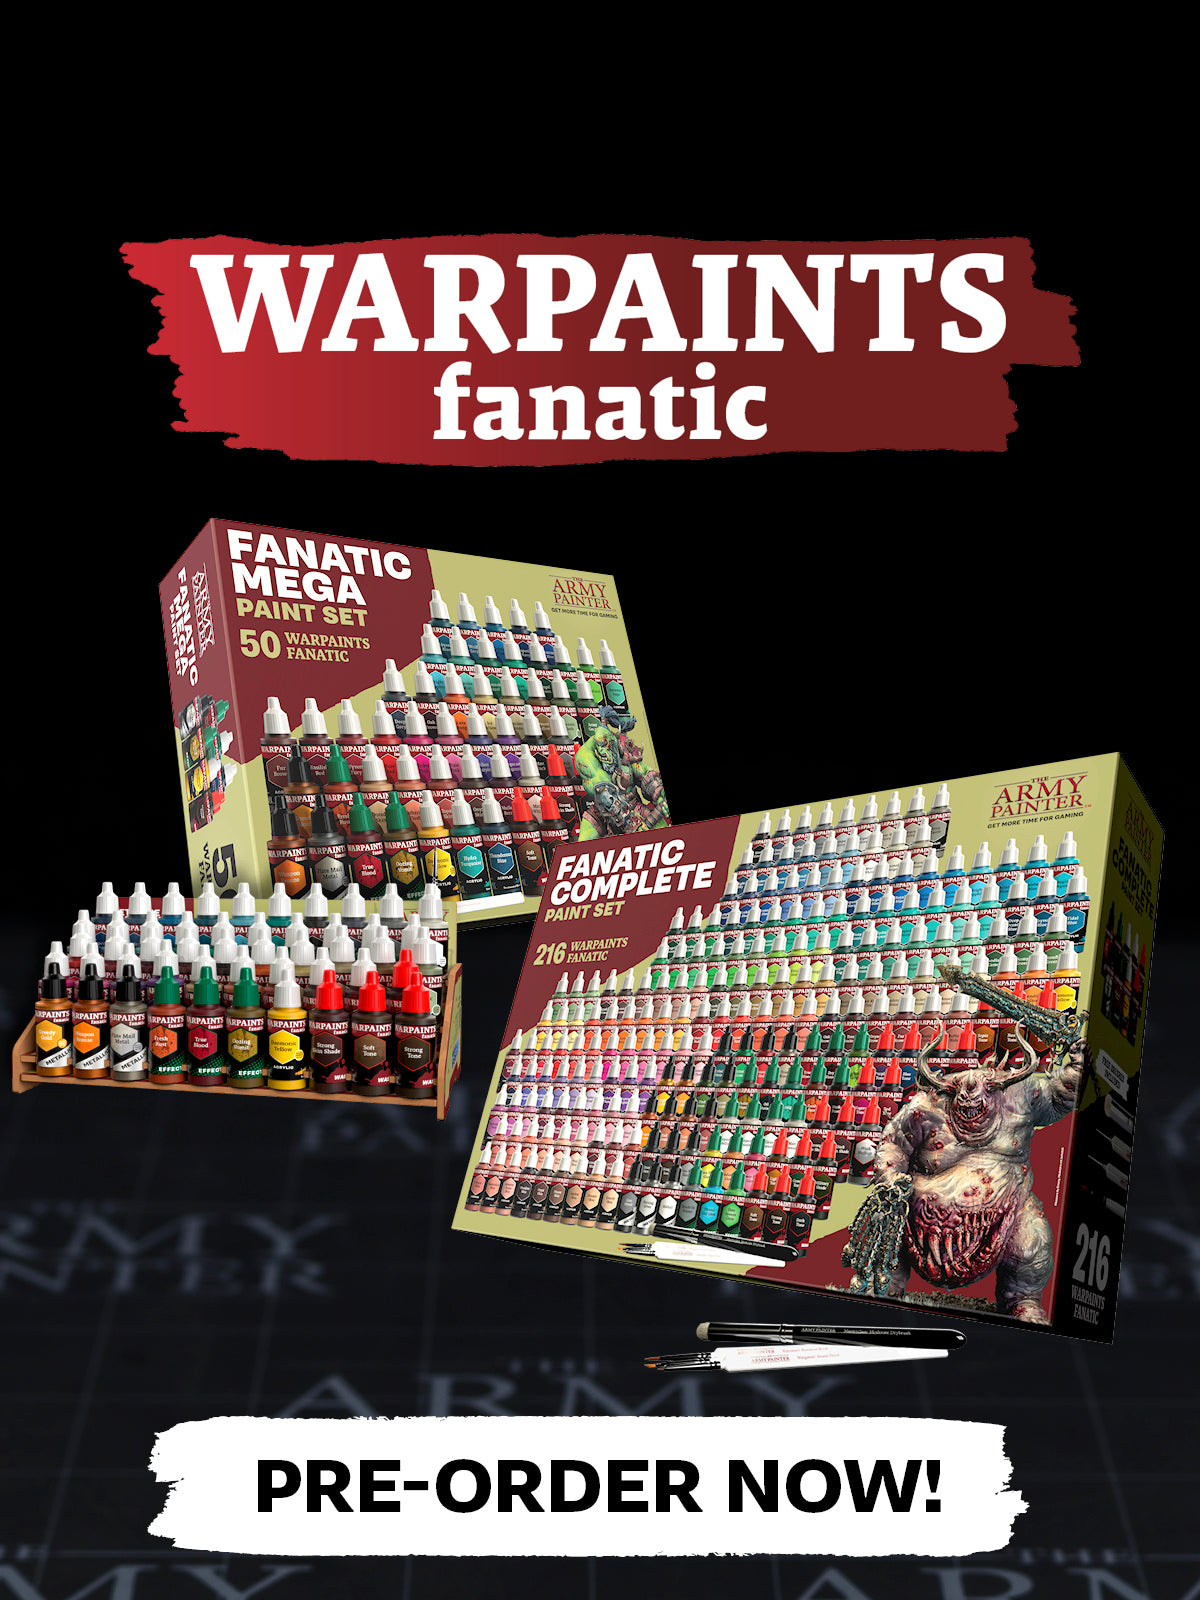 Army Painter Sends Out Free Mystery Miniature Paint Shipments